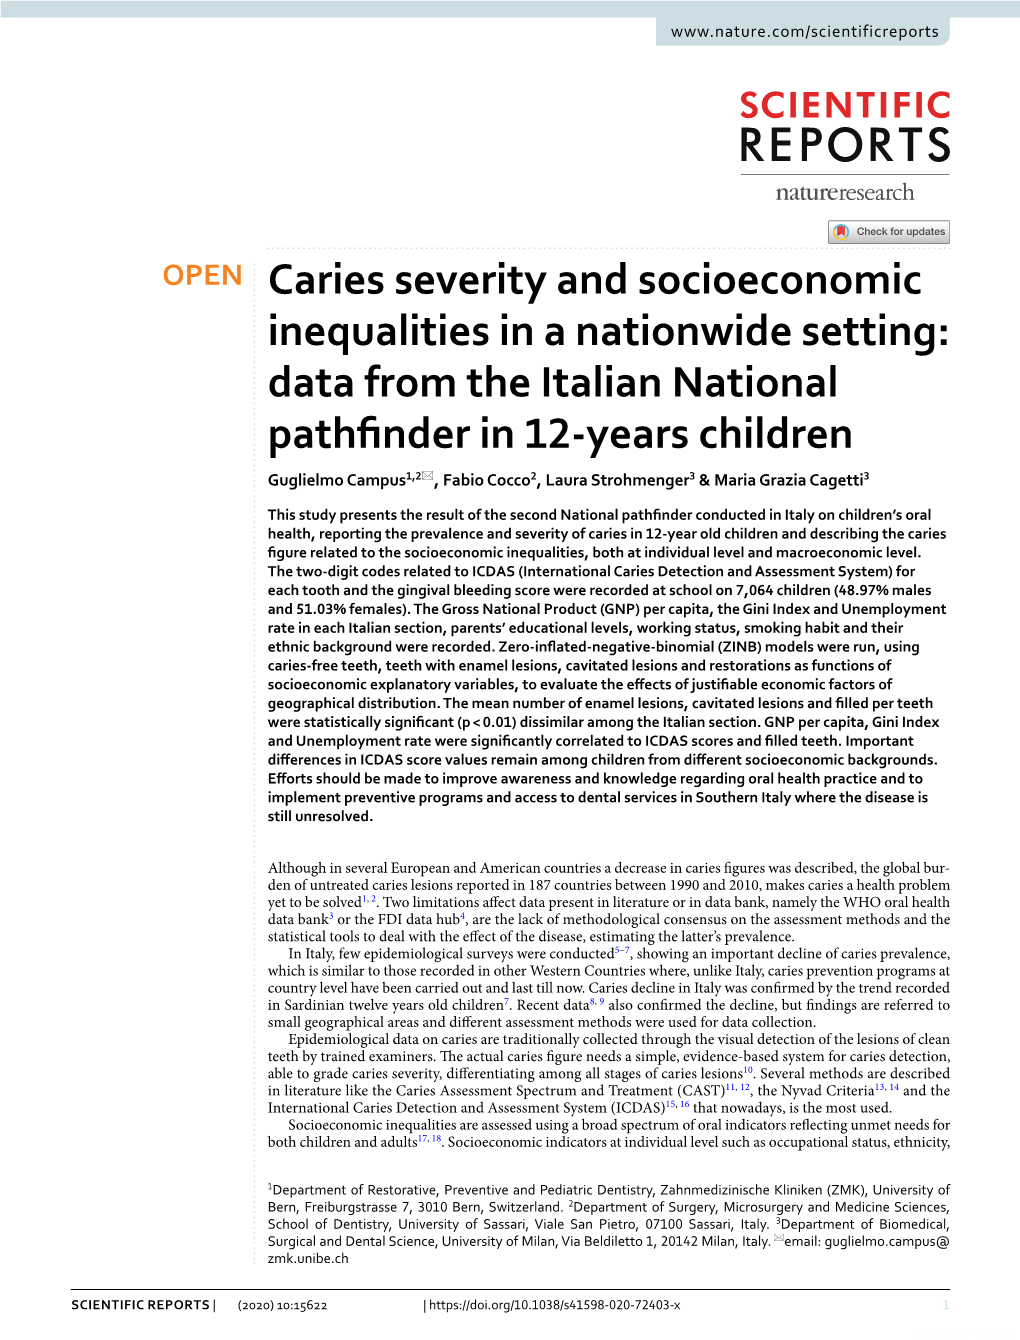 Caries Severity and Socioeconomic Inequalities in a Nationwide Setting